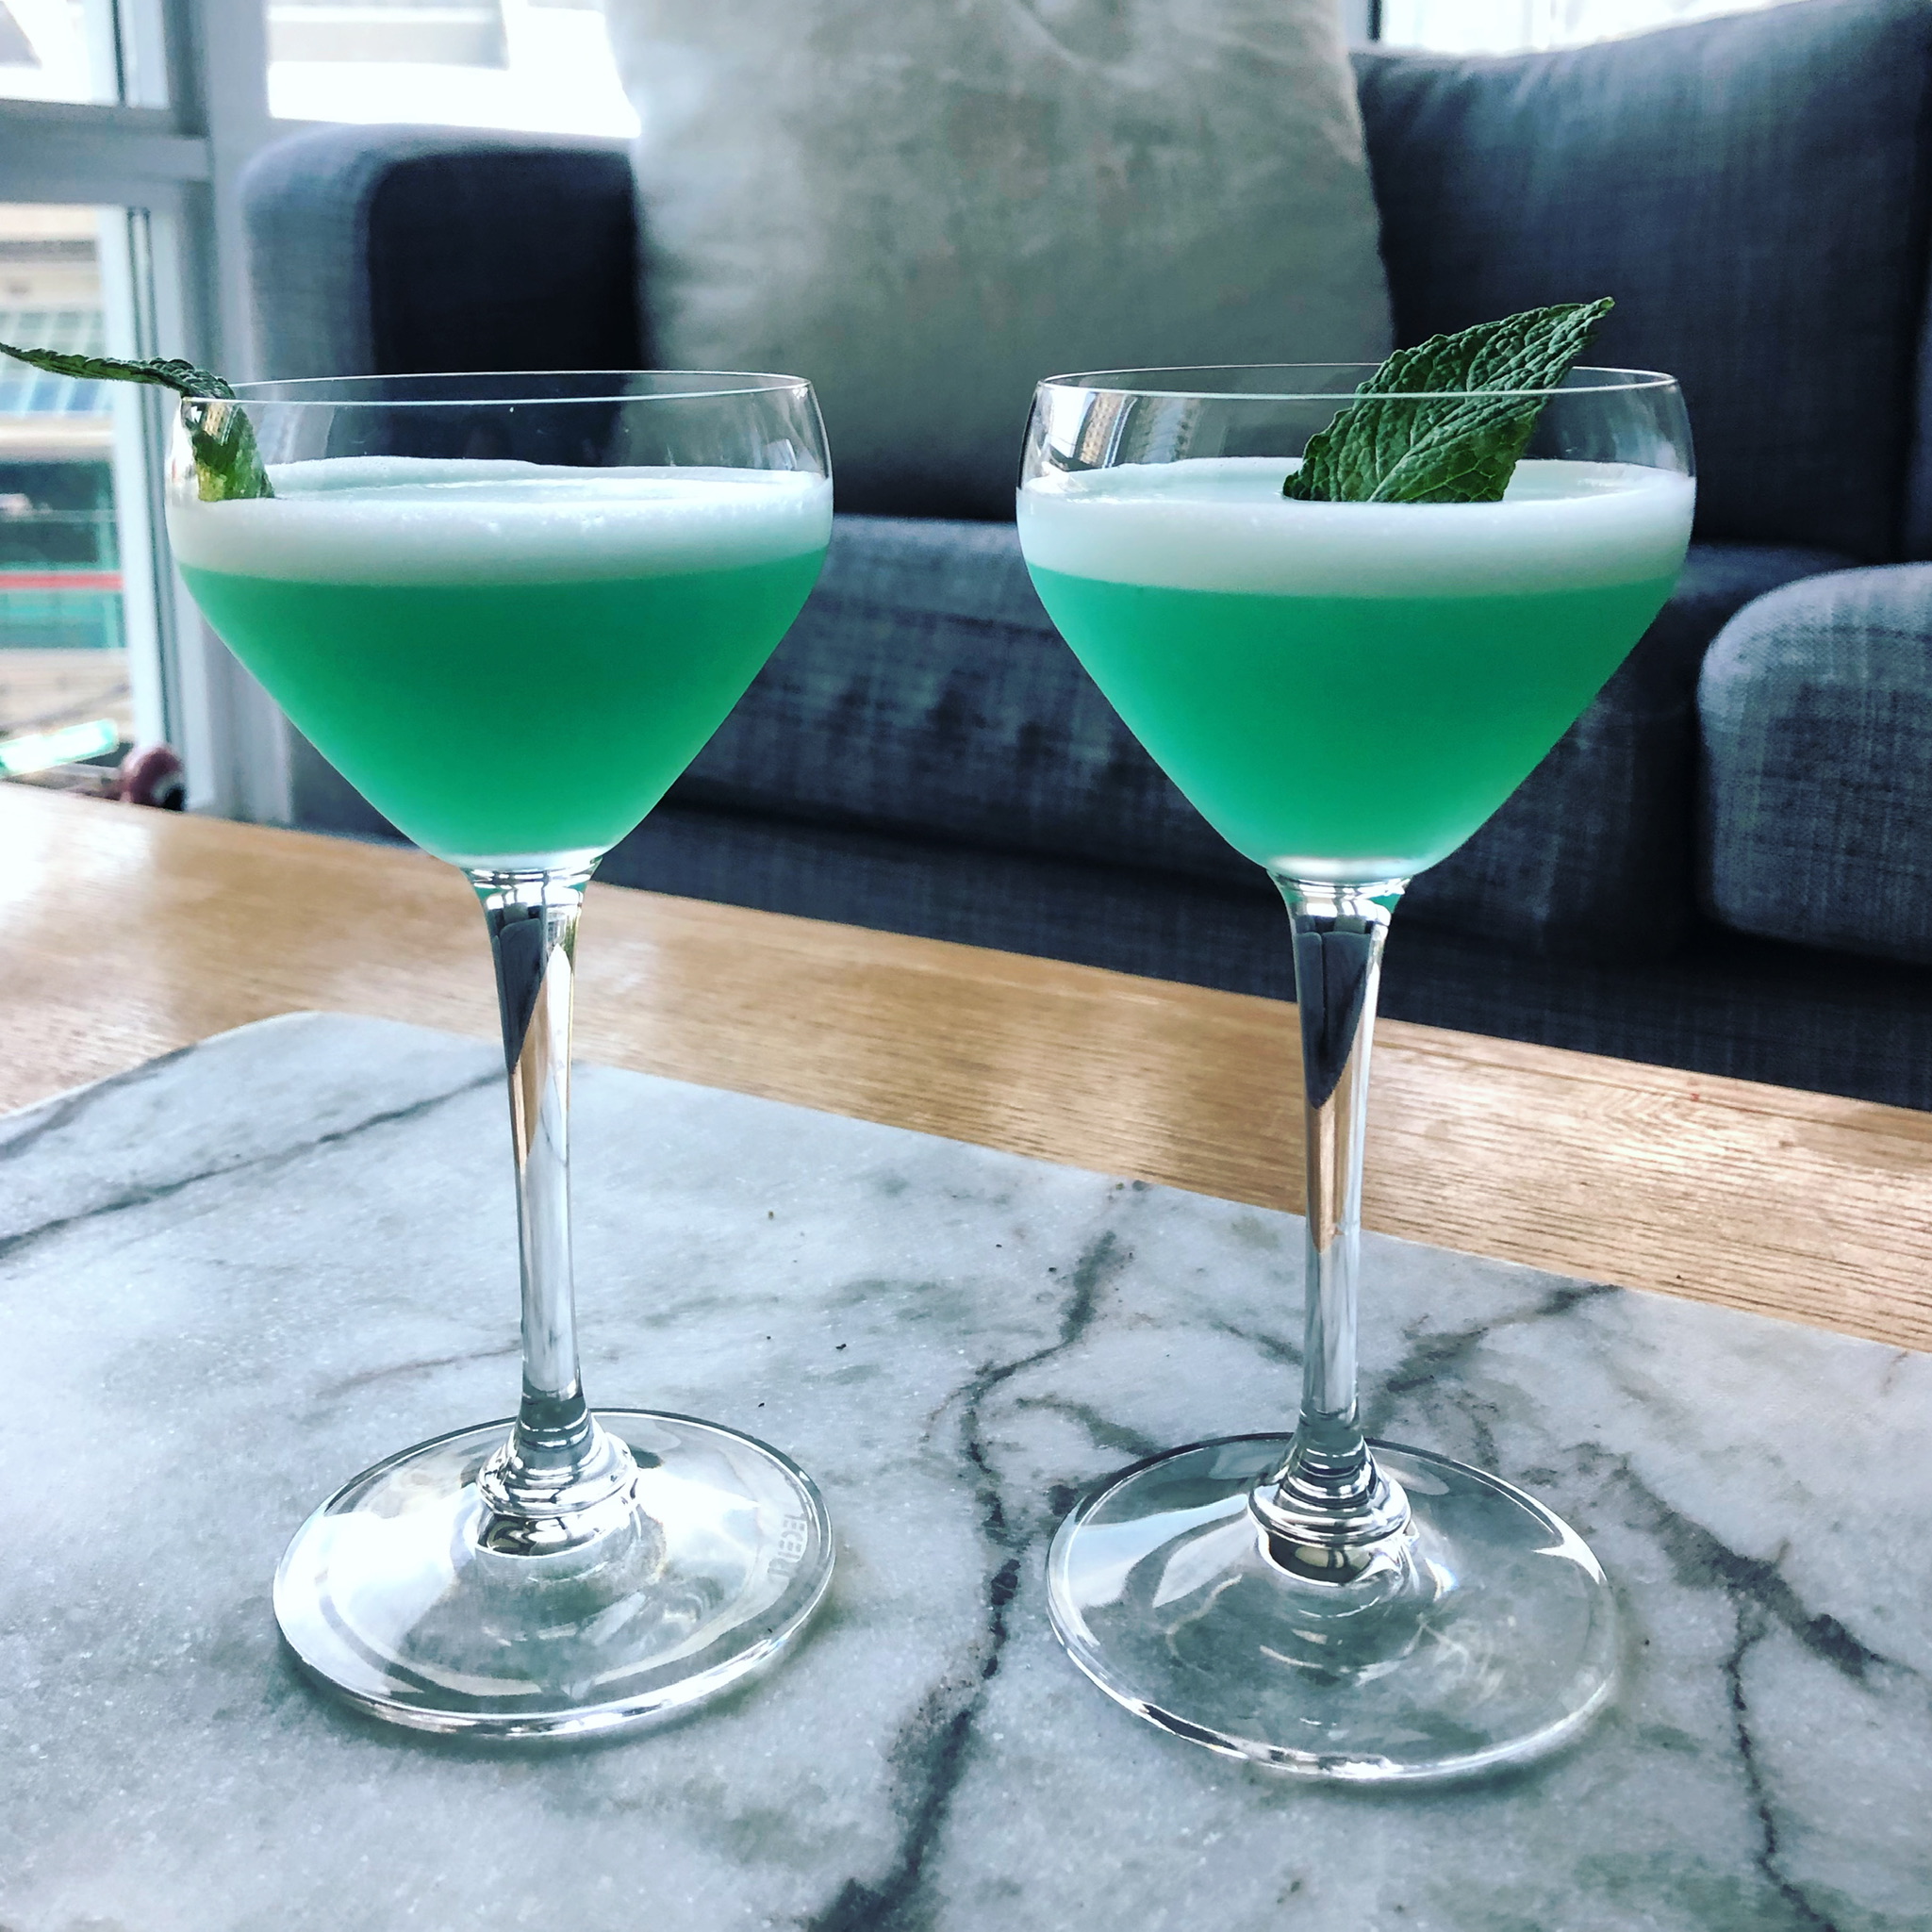 Seafoam - The Updated Blue Hawaii Cocktail - Only New Leftovers